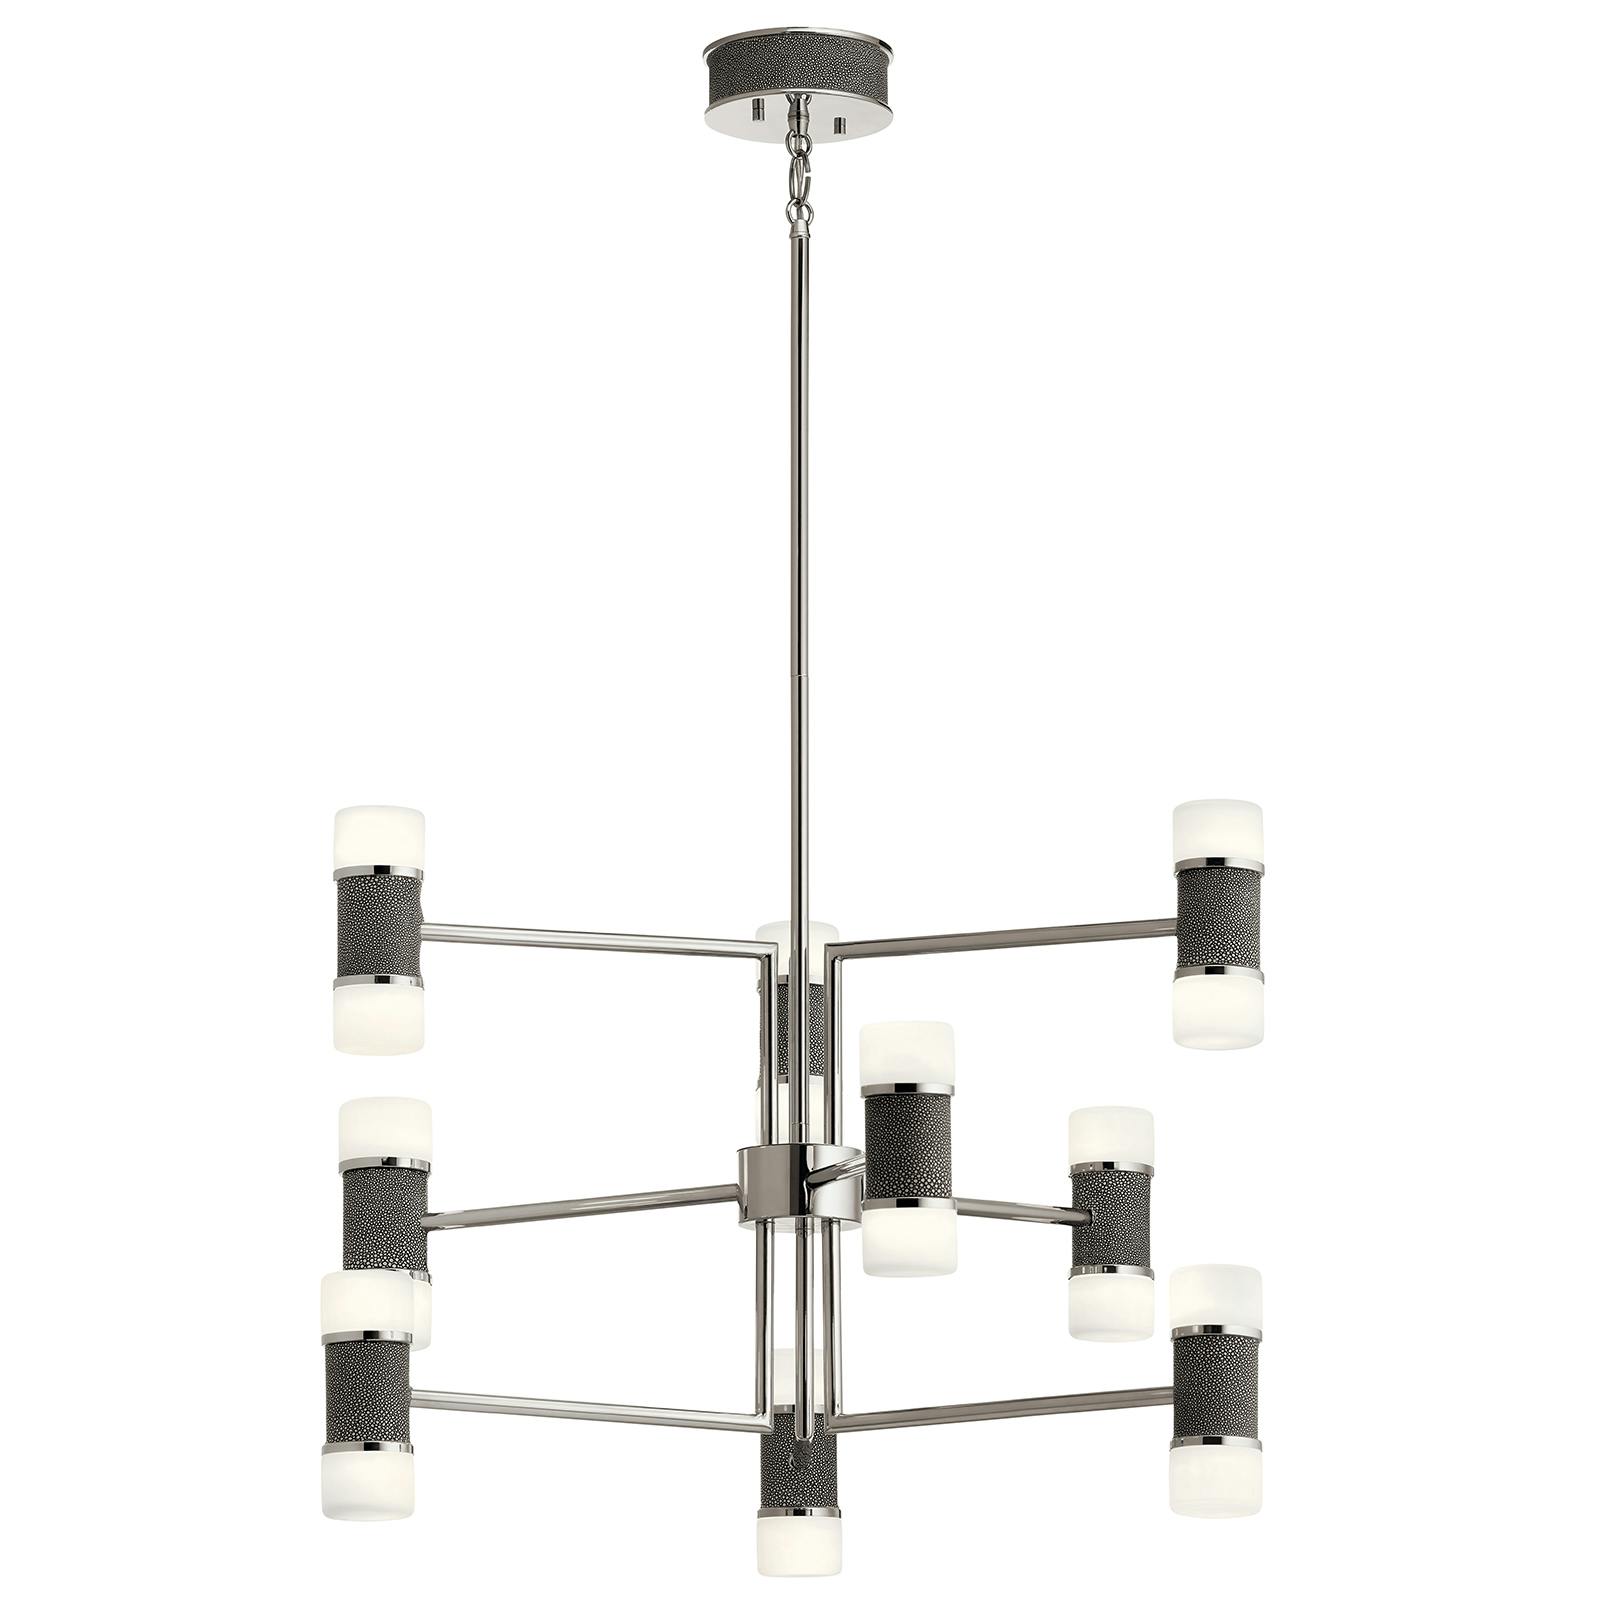 Profile view of the Vey 9 Light 3 Tier Chandelier Nickel on a white background